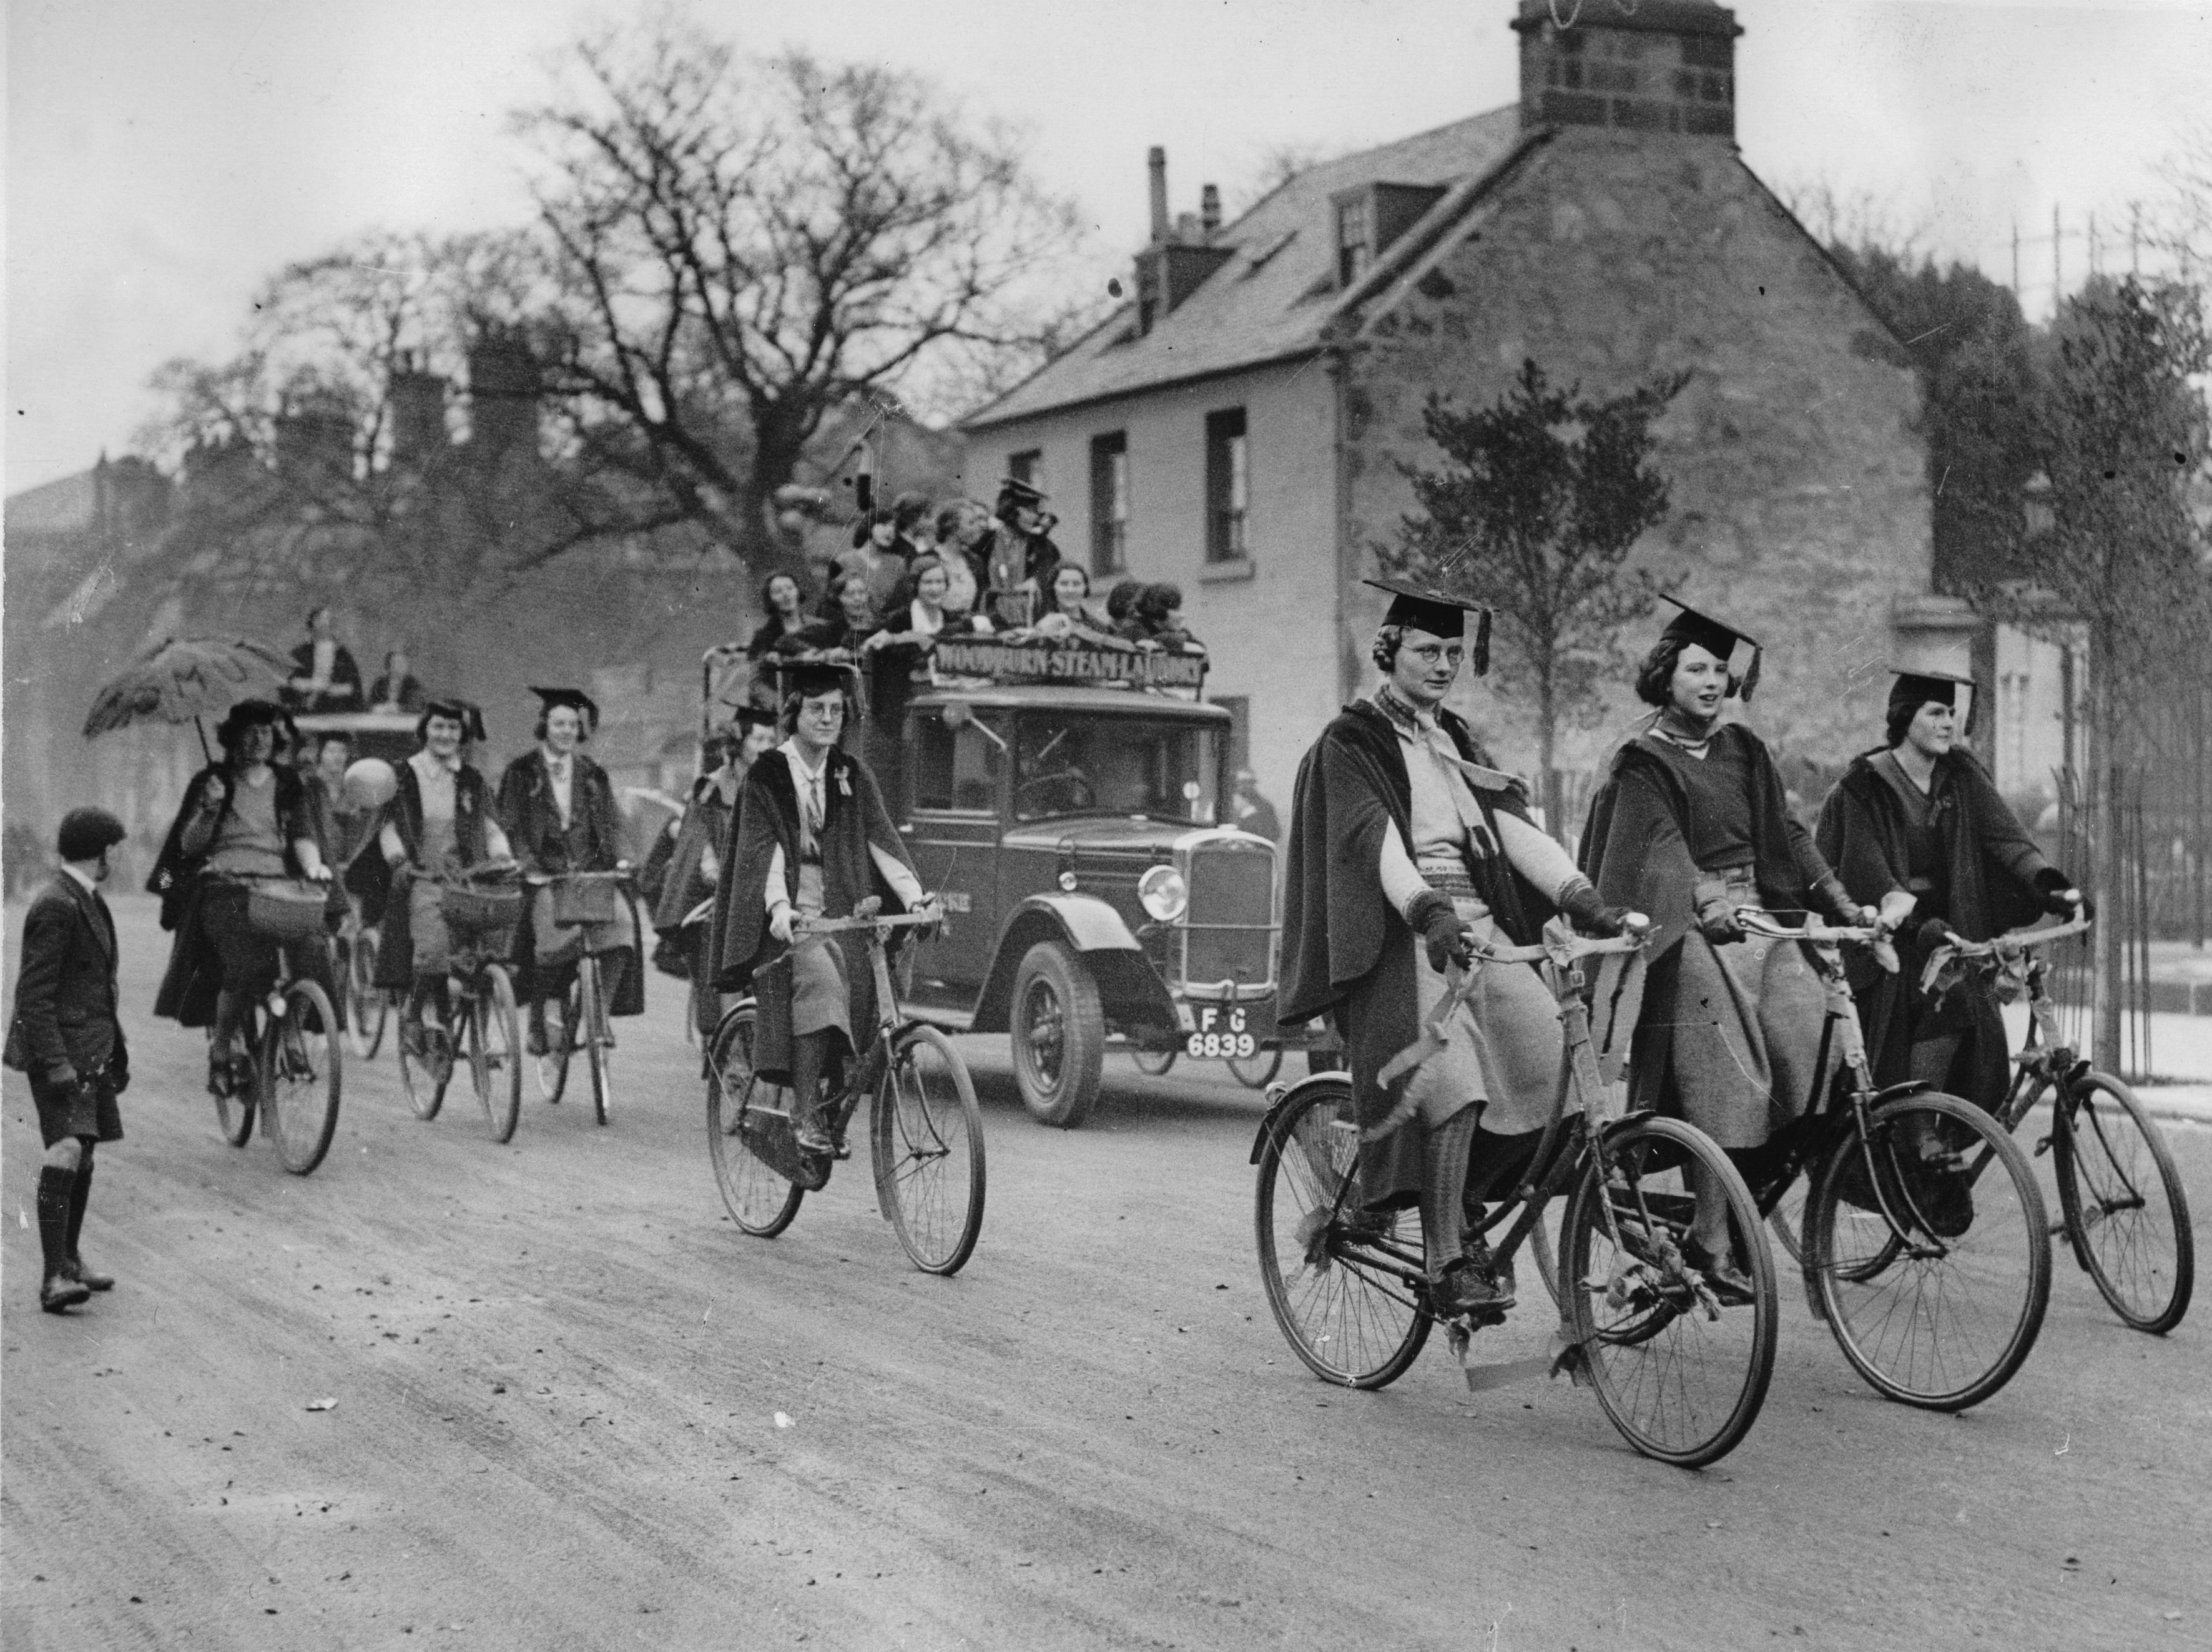 Female students at St Andrews University ride to the polling station where their new principal is voted, circa 1930.  (Photo by Austrian Archives (S)/Imagno/Getty Images)